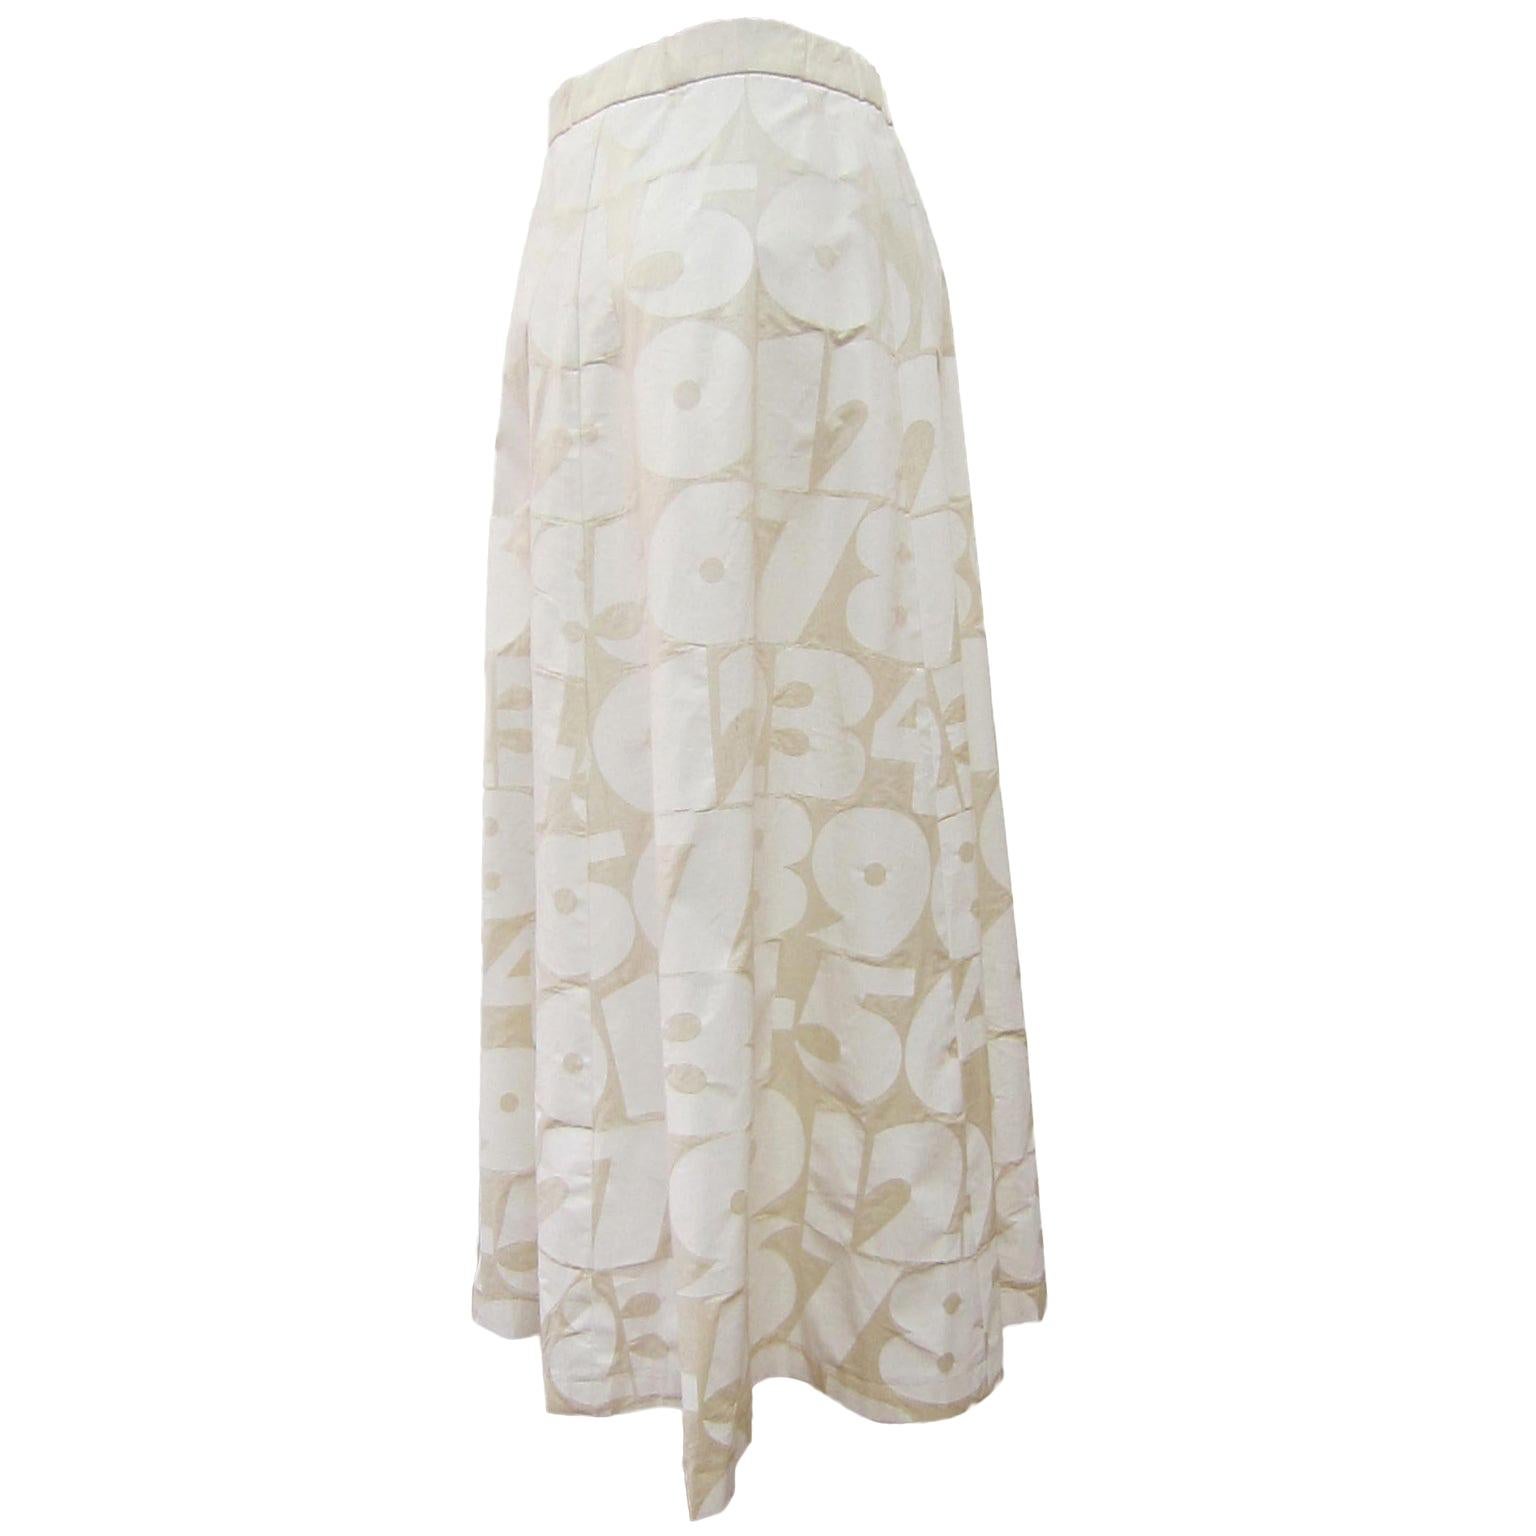 Comme des Garcons skirt from AD 2001.
Fabric emblazoned with large graphic numbers. Side zip closure. 
Size : S
Waist : 64 cm
Length : 85 cm